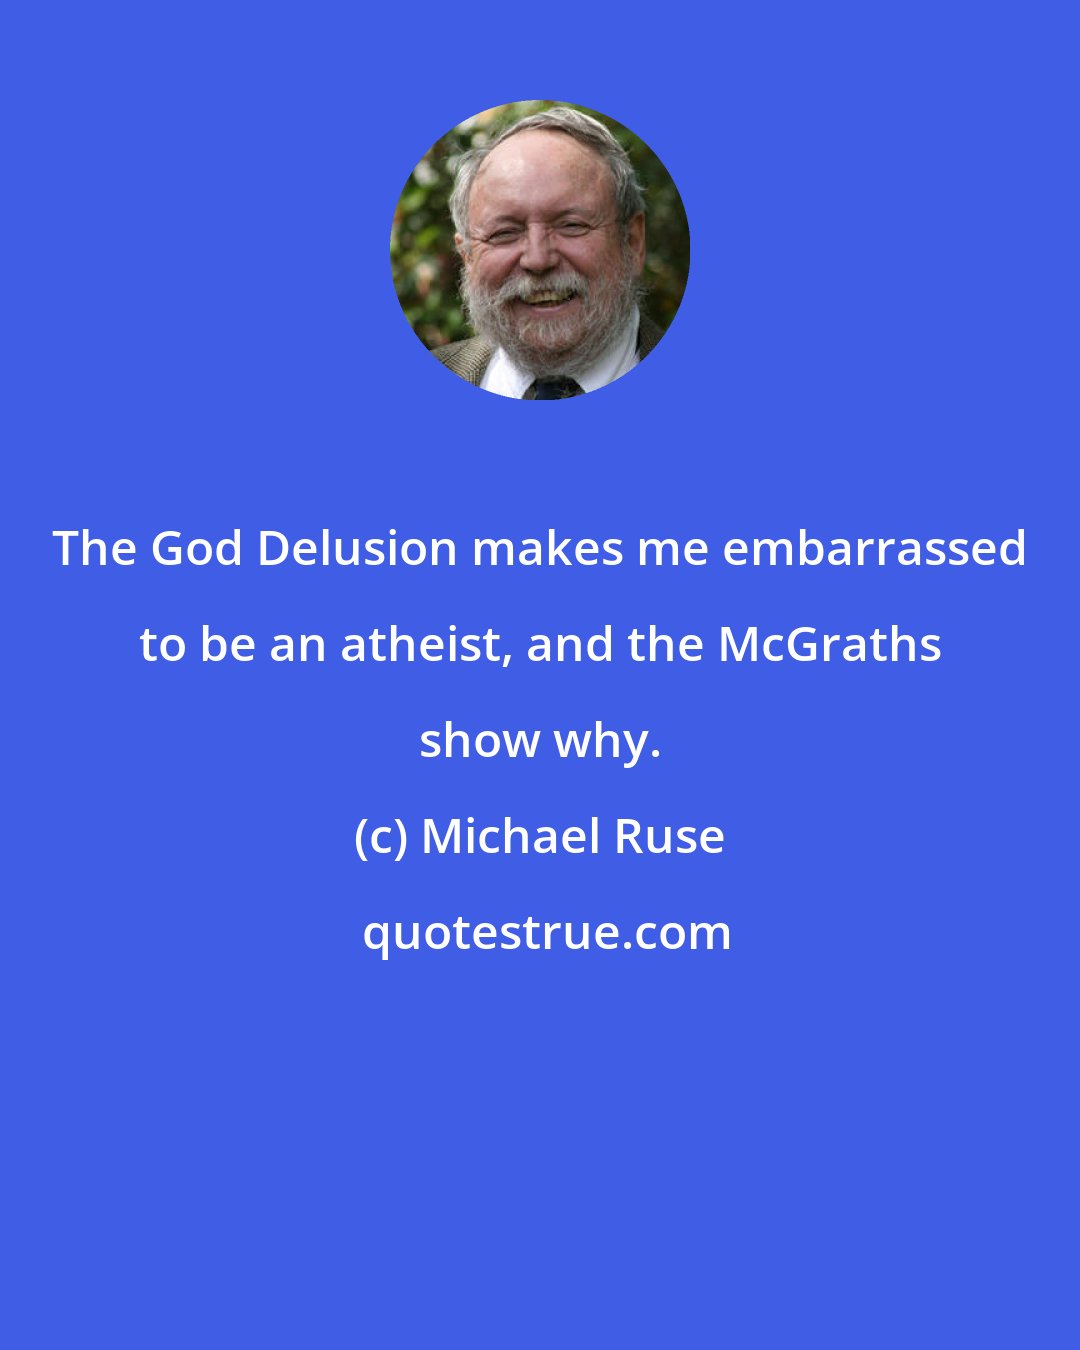 Michael Ruse: The God Delusion makes me embarrassed to be an atheist, and the McGraths show why.